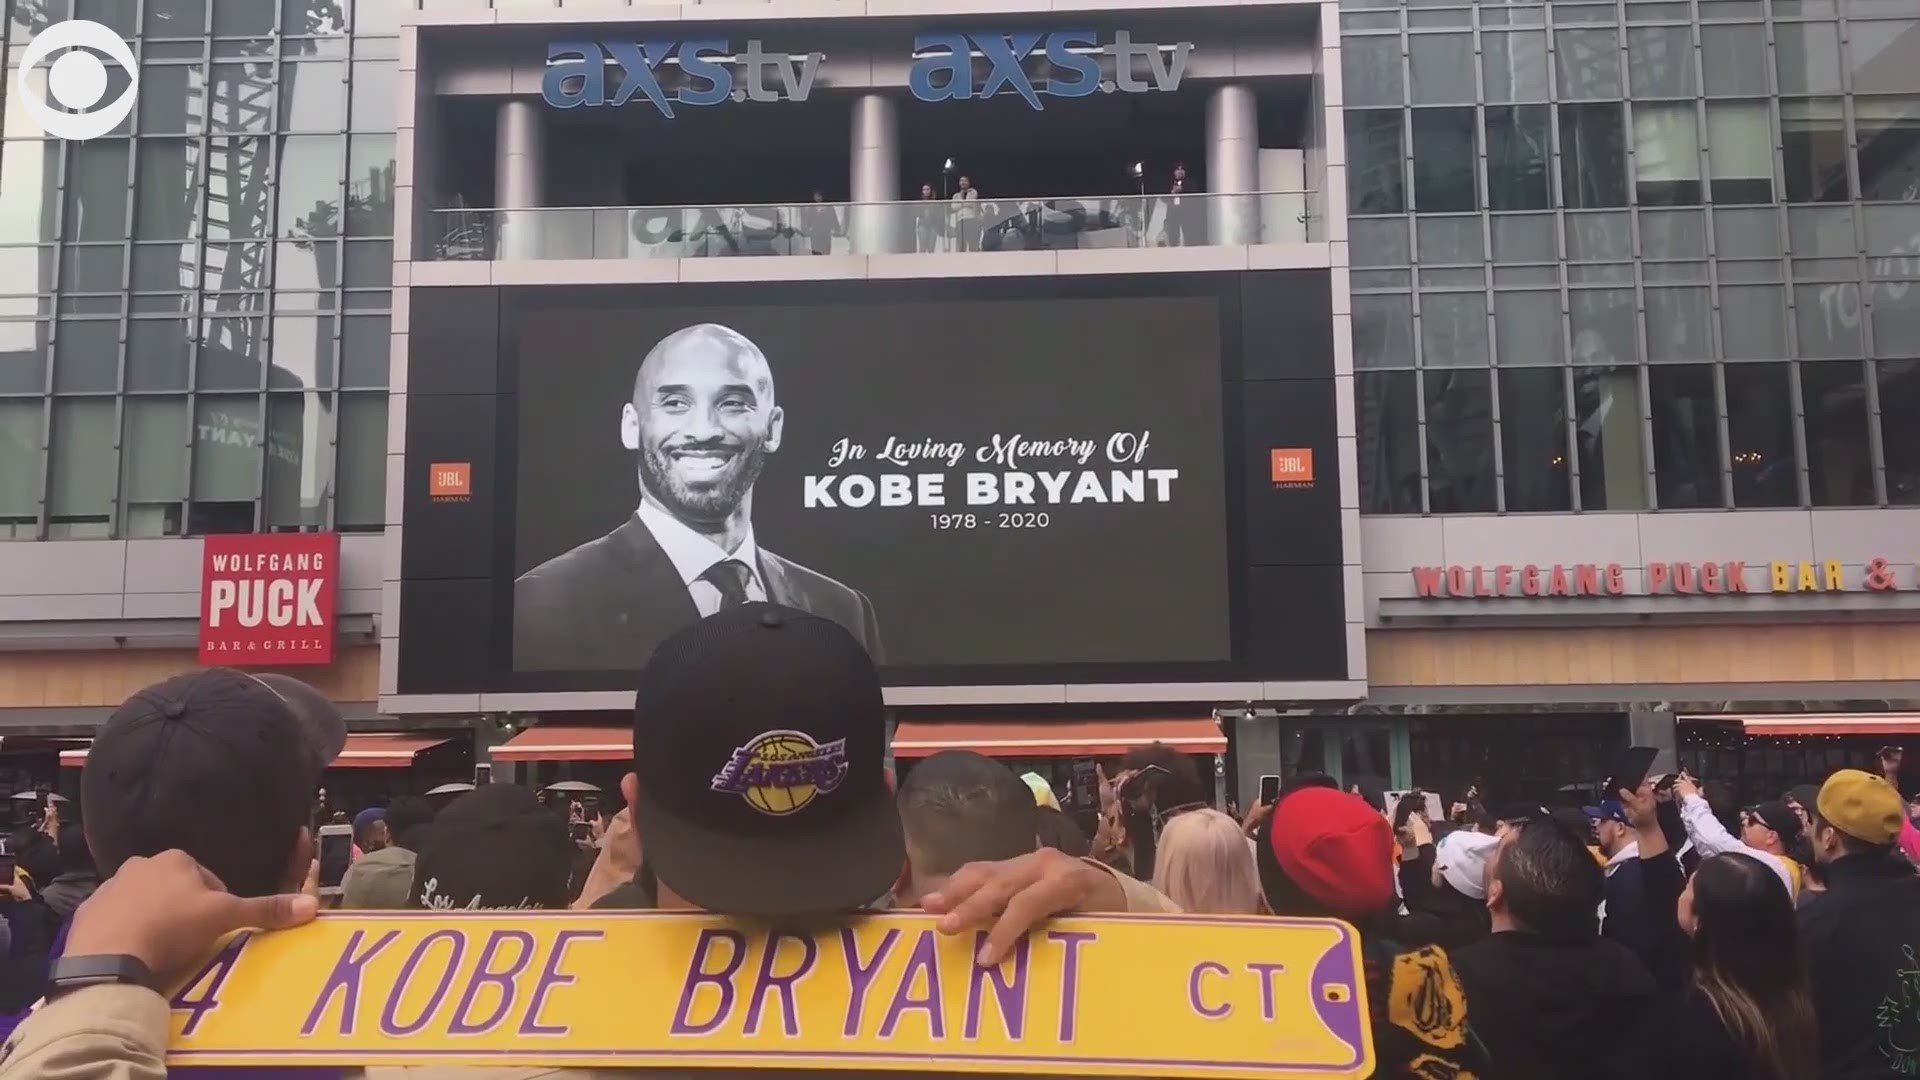 Fans chanted "Kobe, Kobe, Kobe" as they gathered near the Staples Center in LA to pay their respects to the former Lakers star.  Kobe died in helicopter crash Sunday